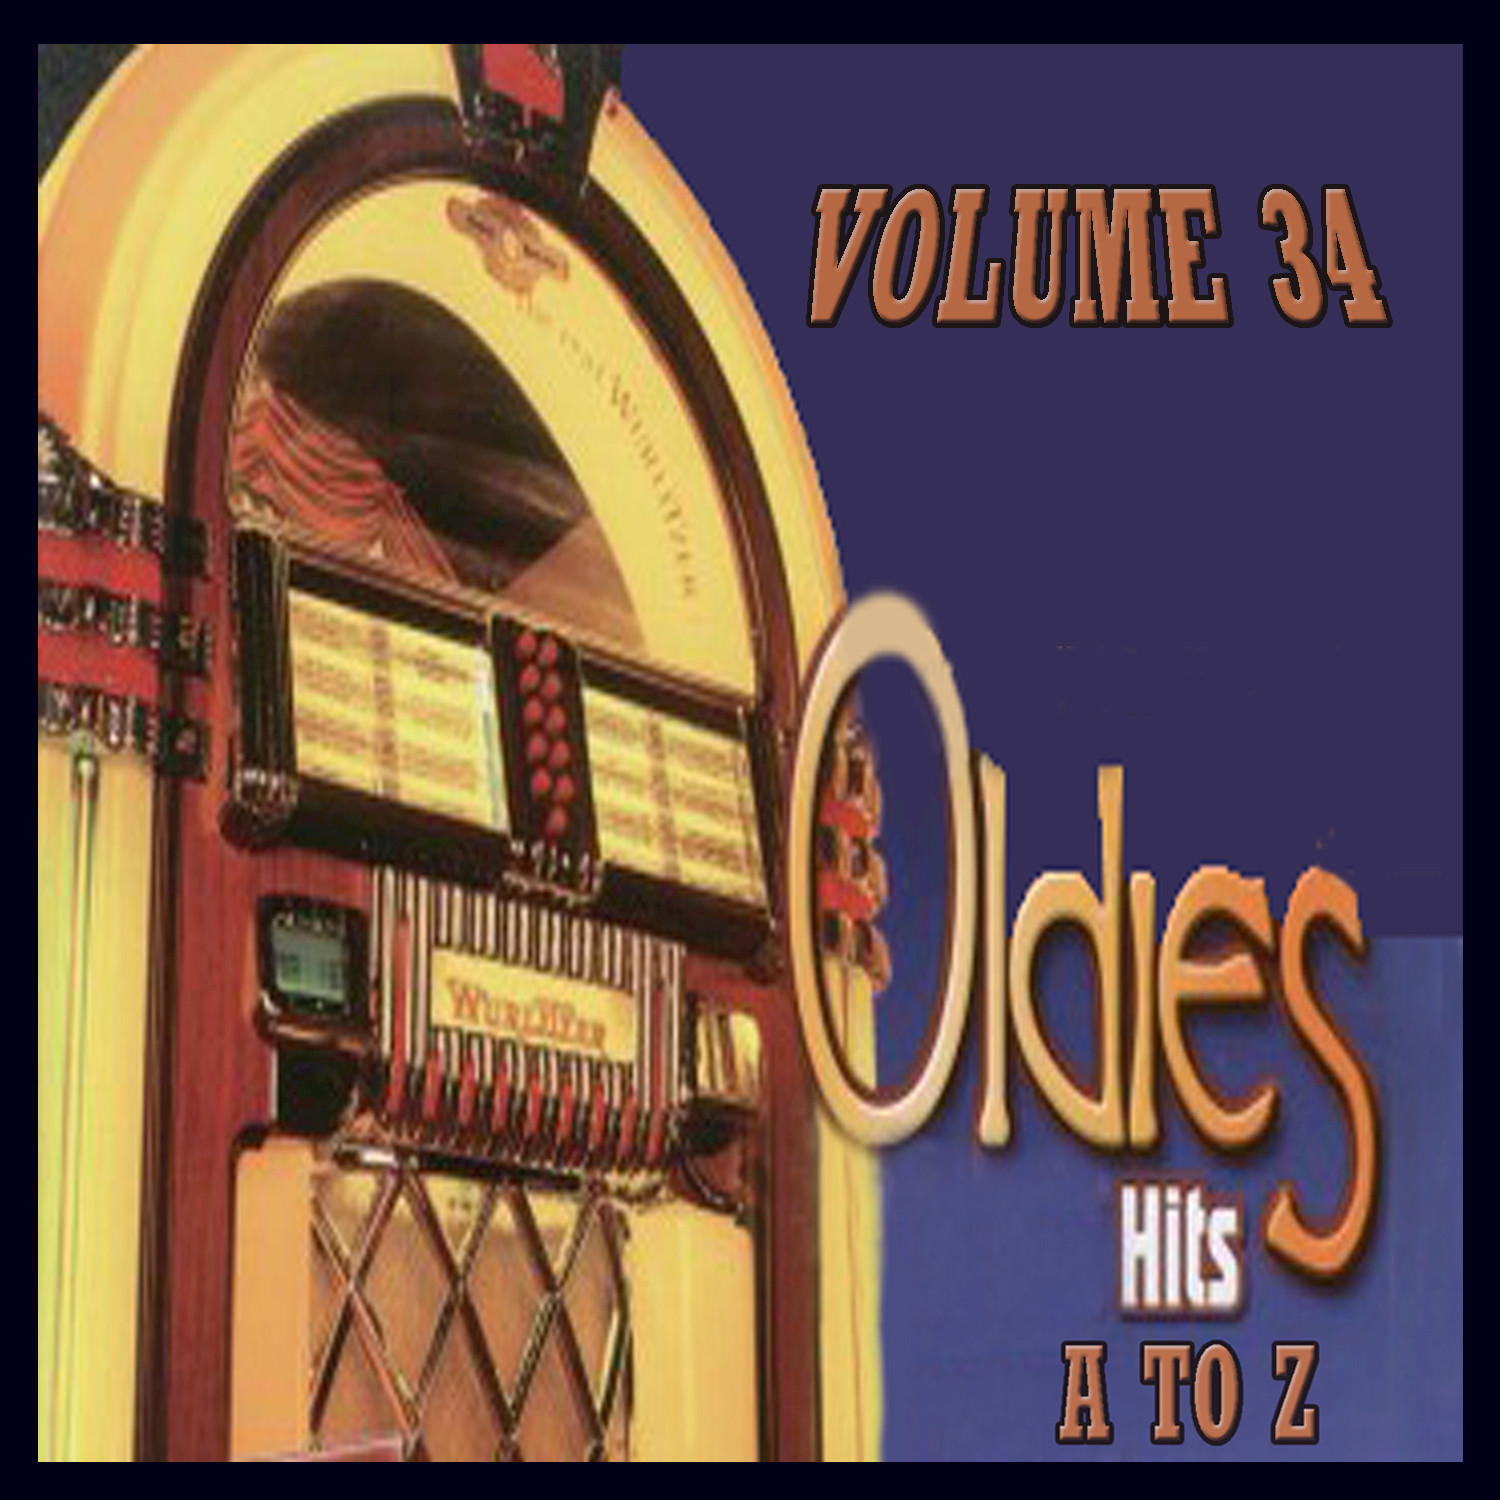 Oldies Hits A to Z, Vol.34